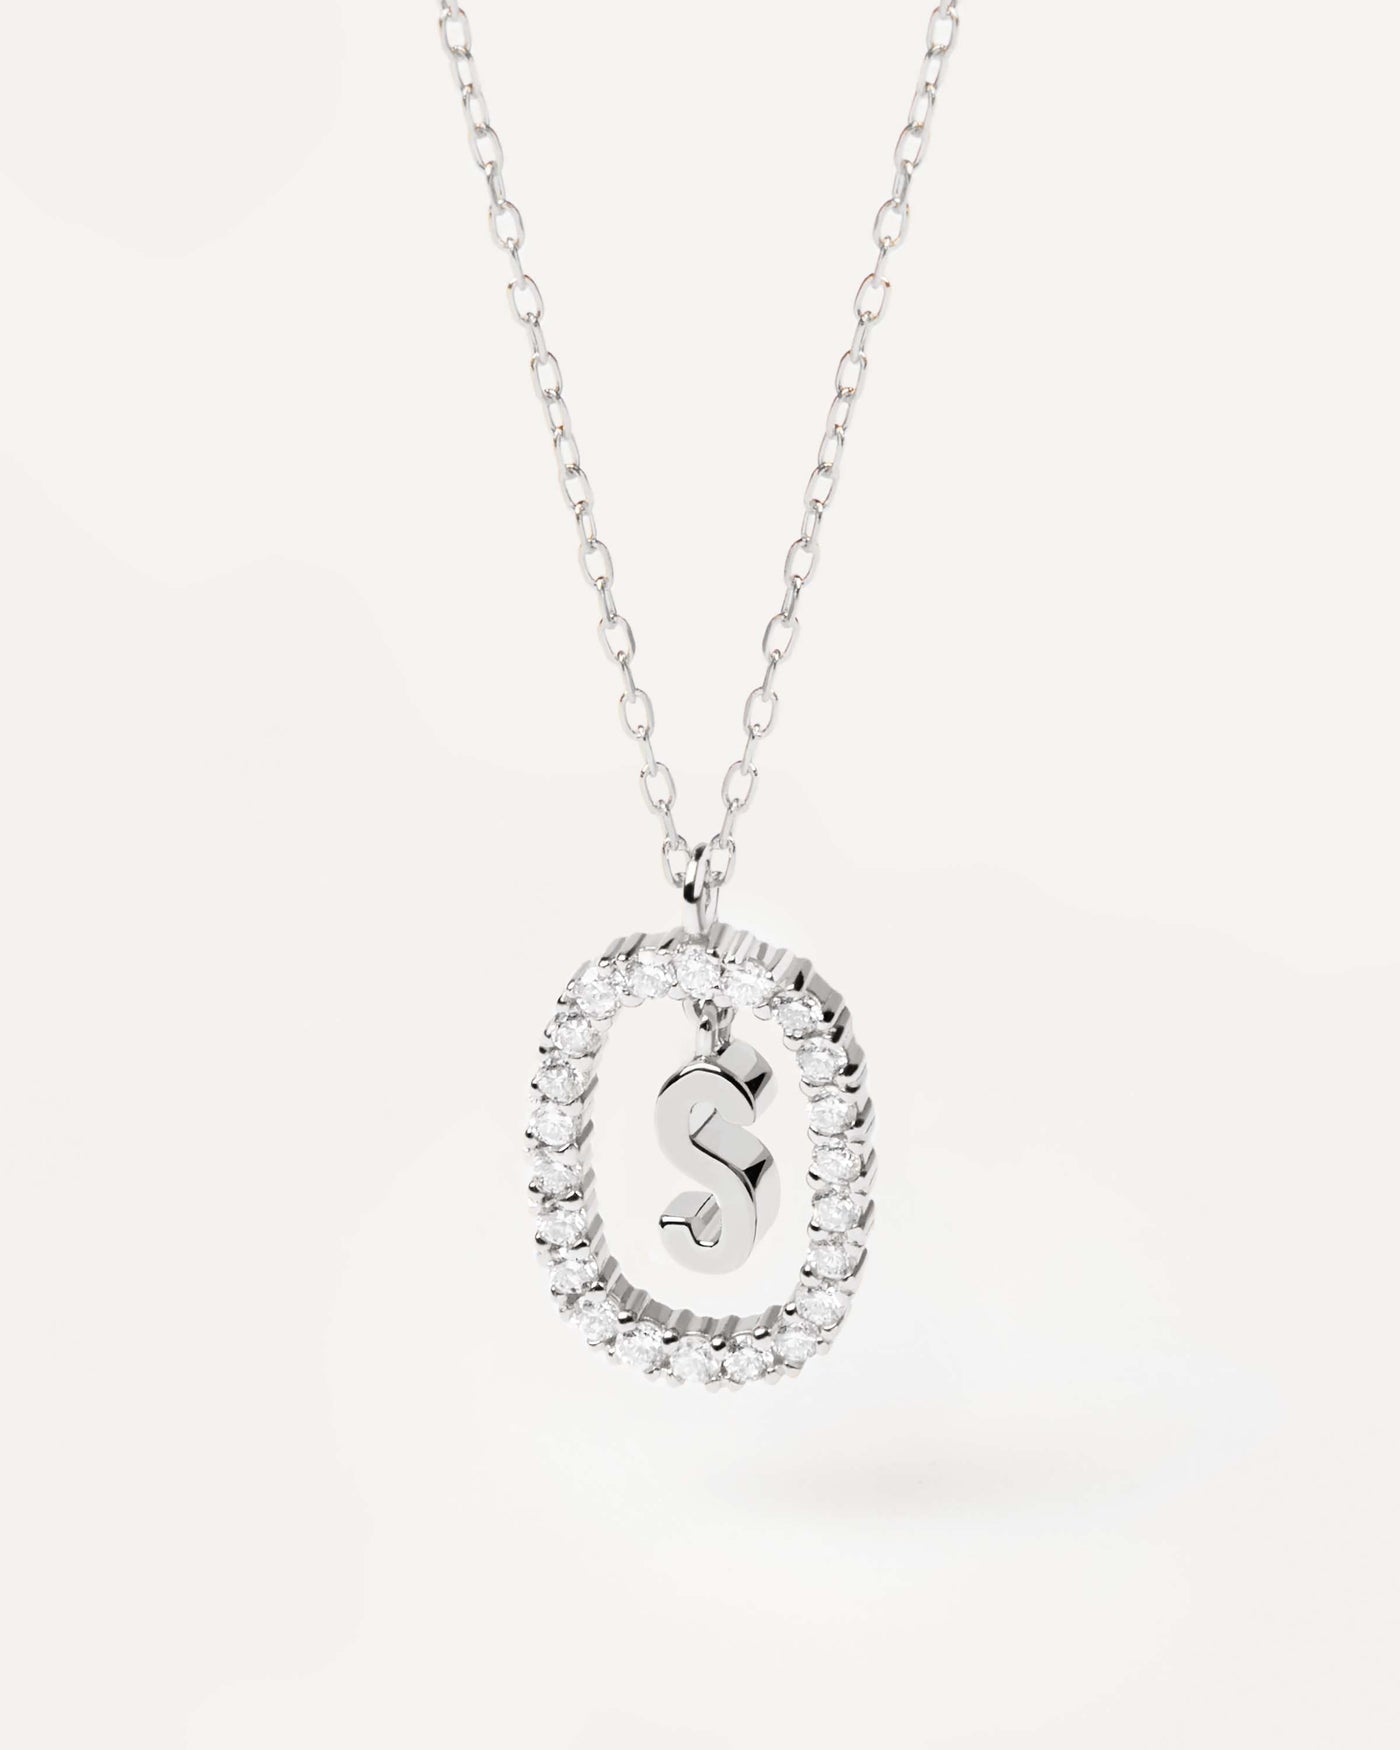 2023 Selection | Diamonds and White Gold Letter S Necklace. Initial S necklace in solid white gold, circled by 0.33 carats lab-grown diamonds. Get the latest arrival from PDPAOLA. Place your order safely and get this Best Seller. Free Shipping.